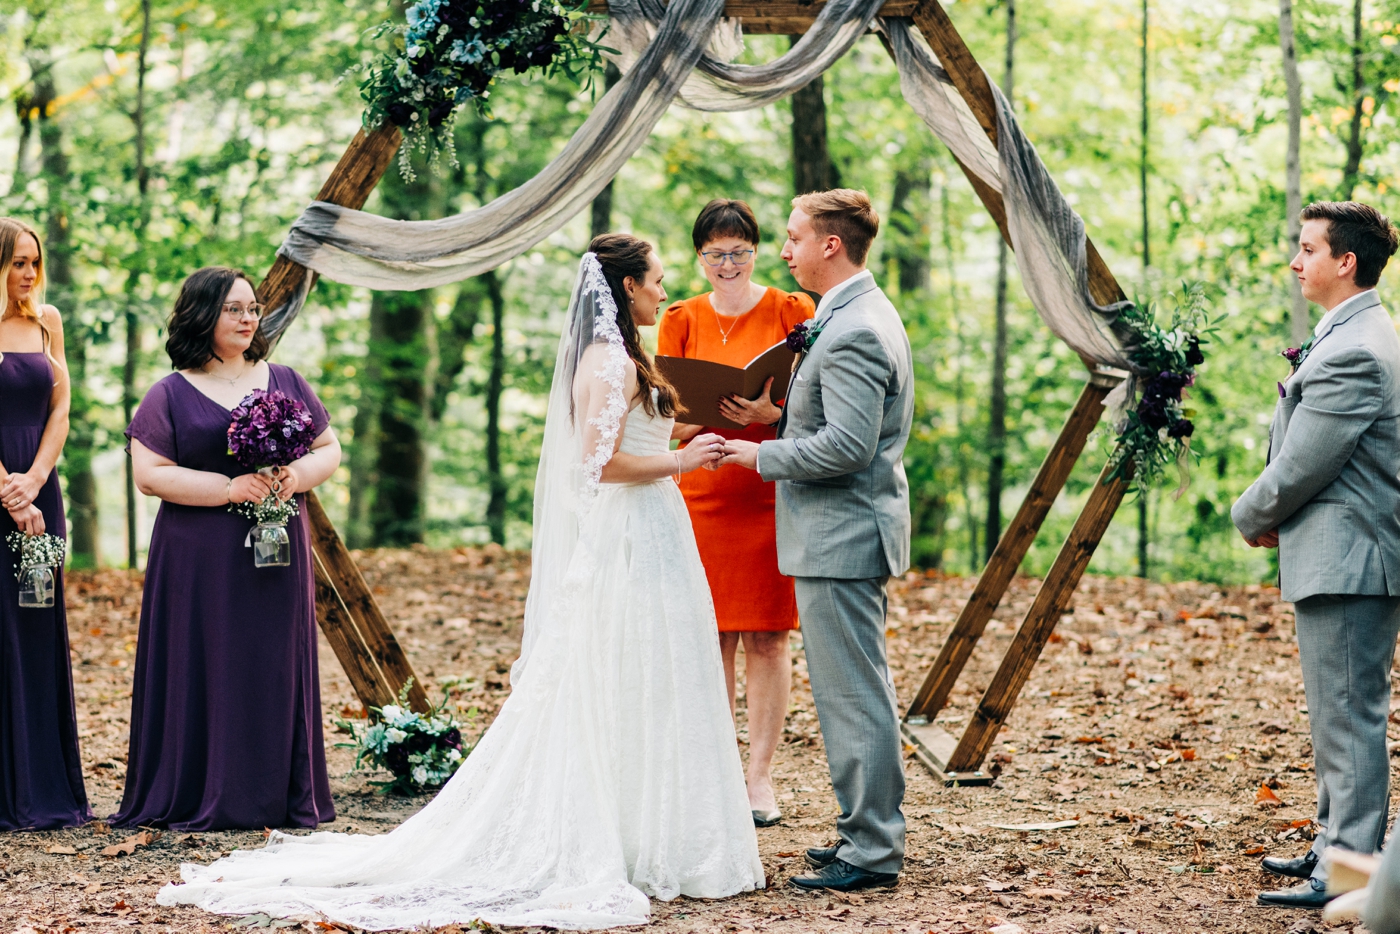 Hexagon arch for rustic wedding ceremony